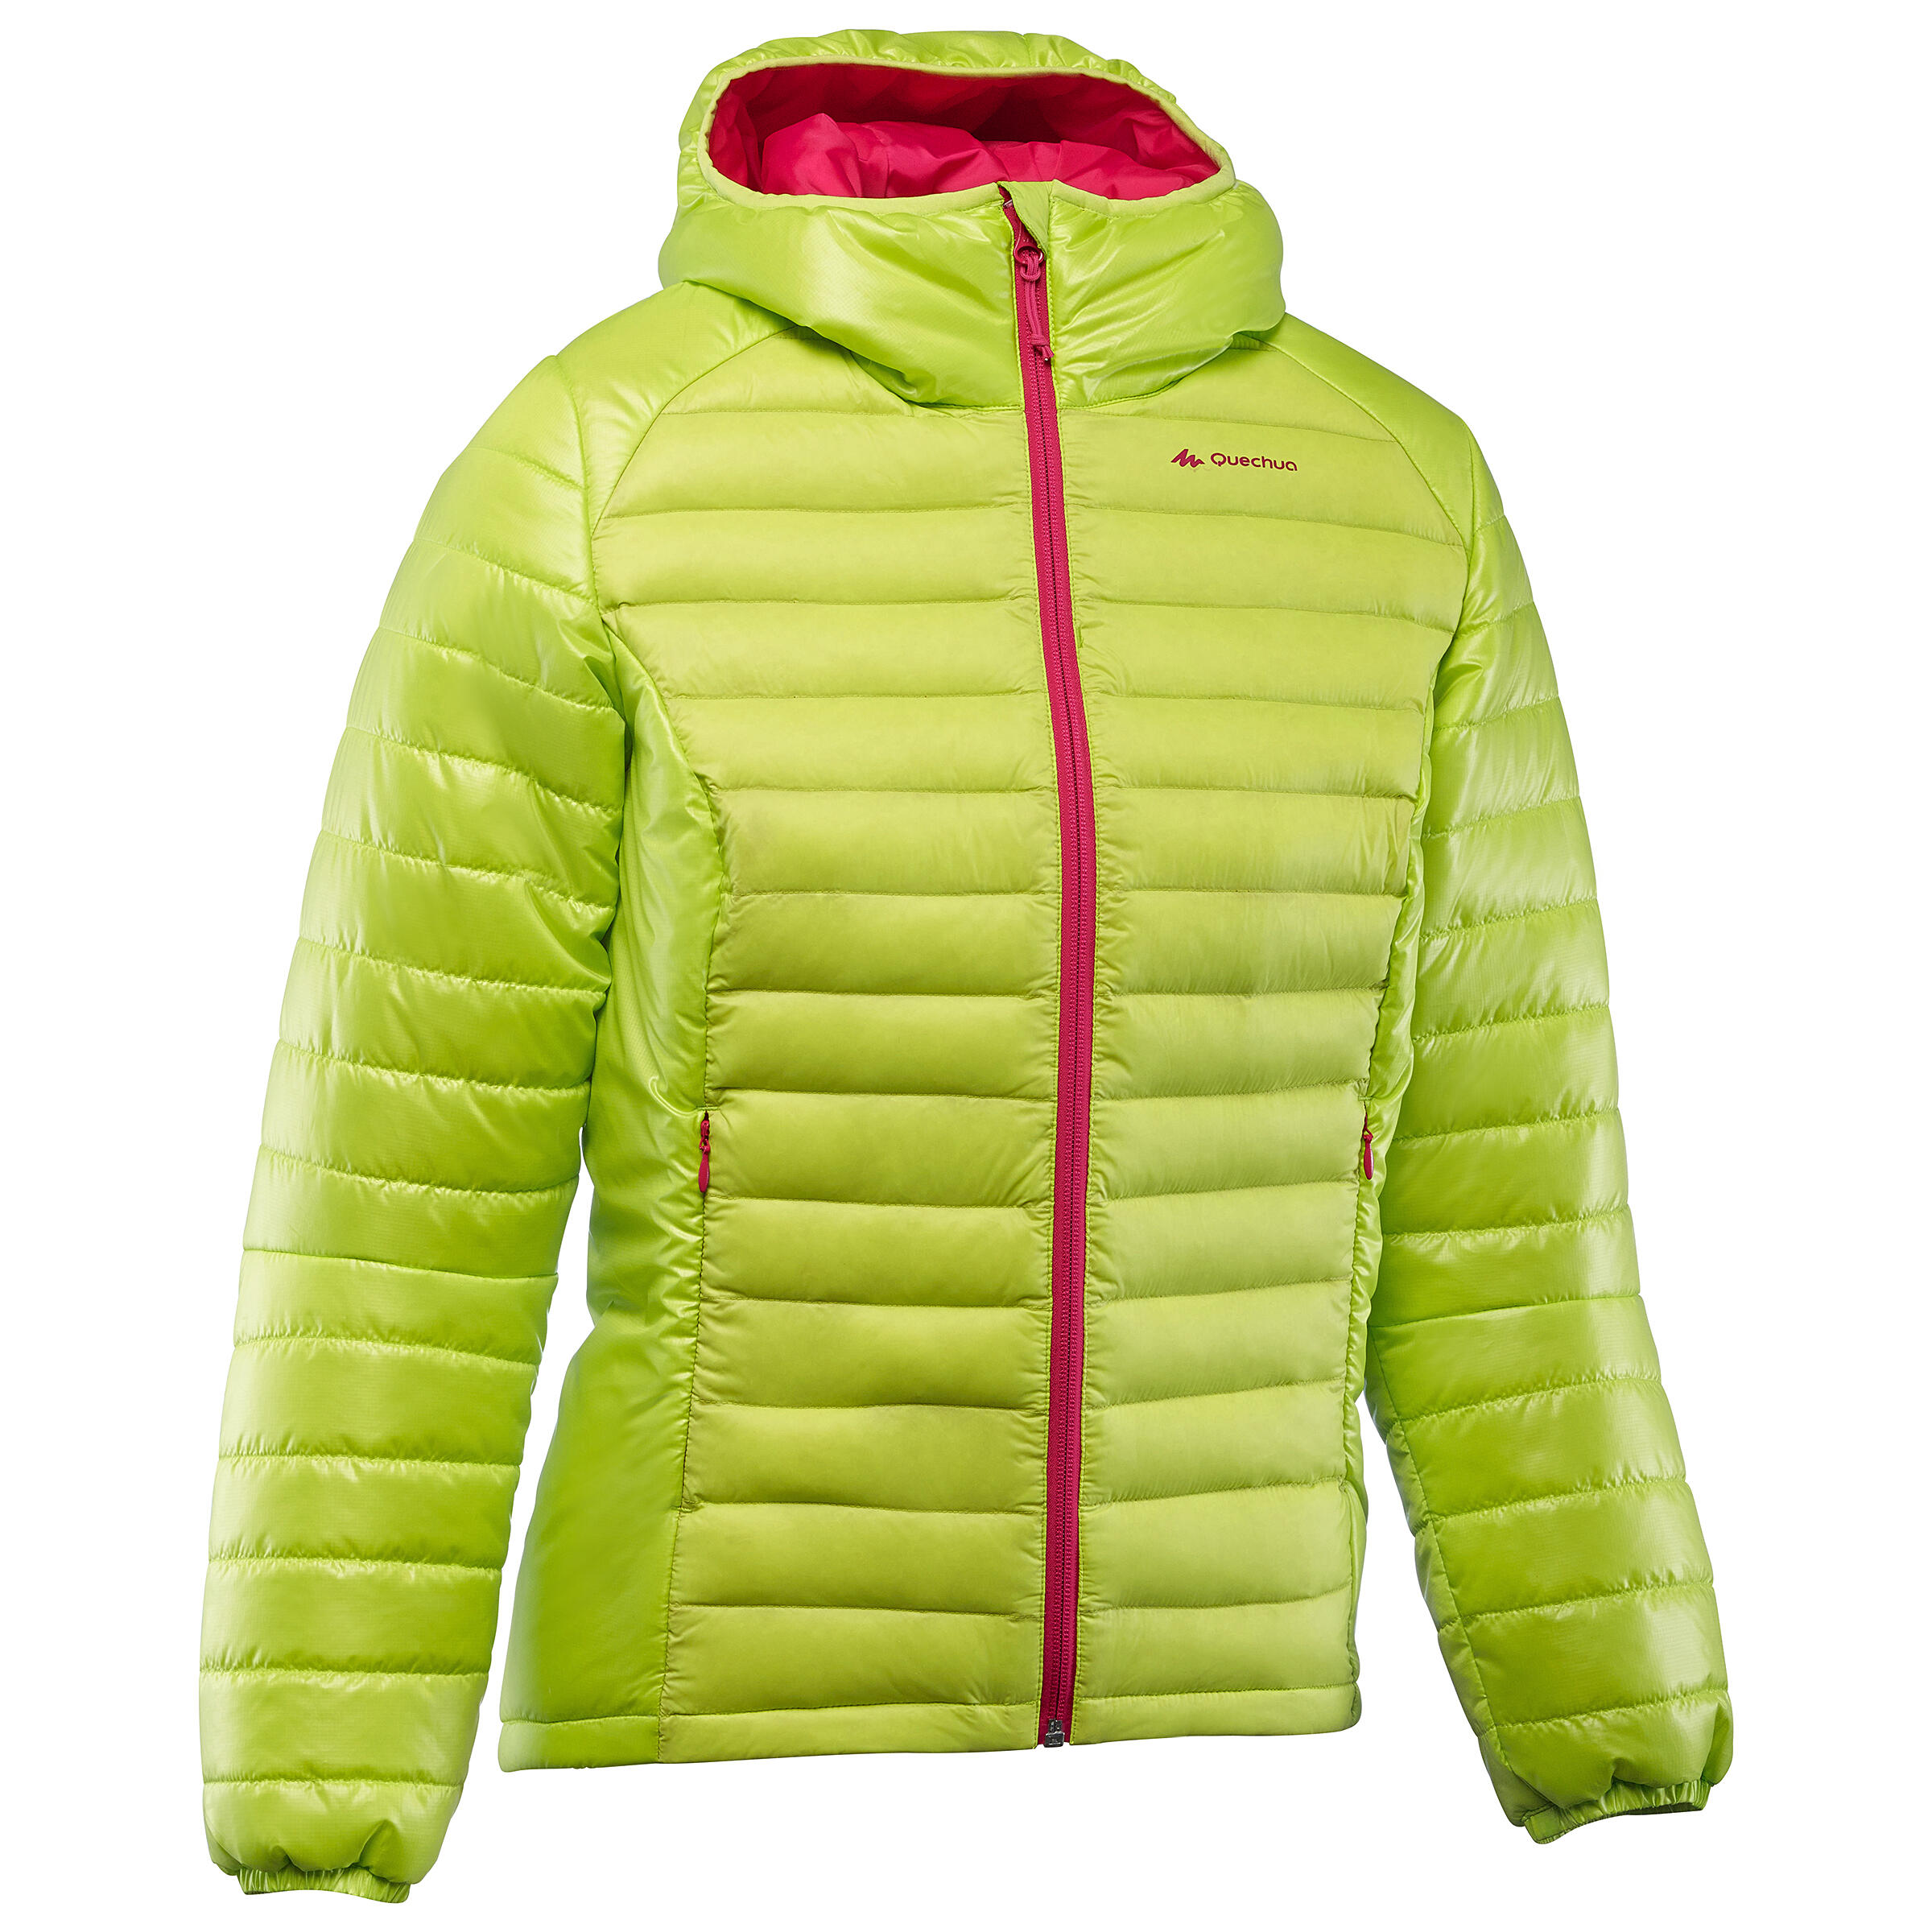 FORCLAZ X-Light Ladies' Quilted Hiking Jacket - yellow